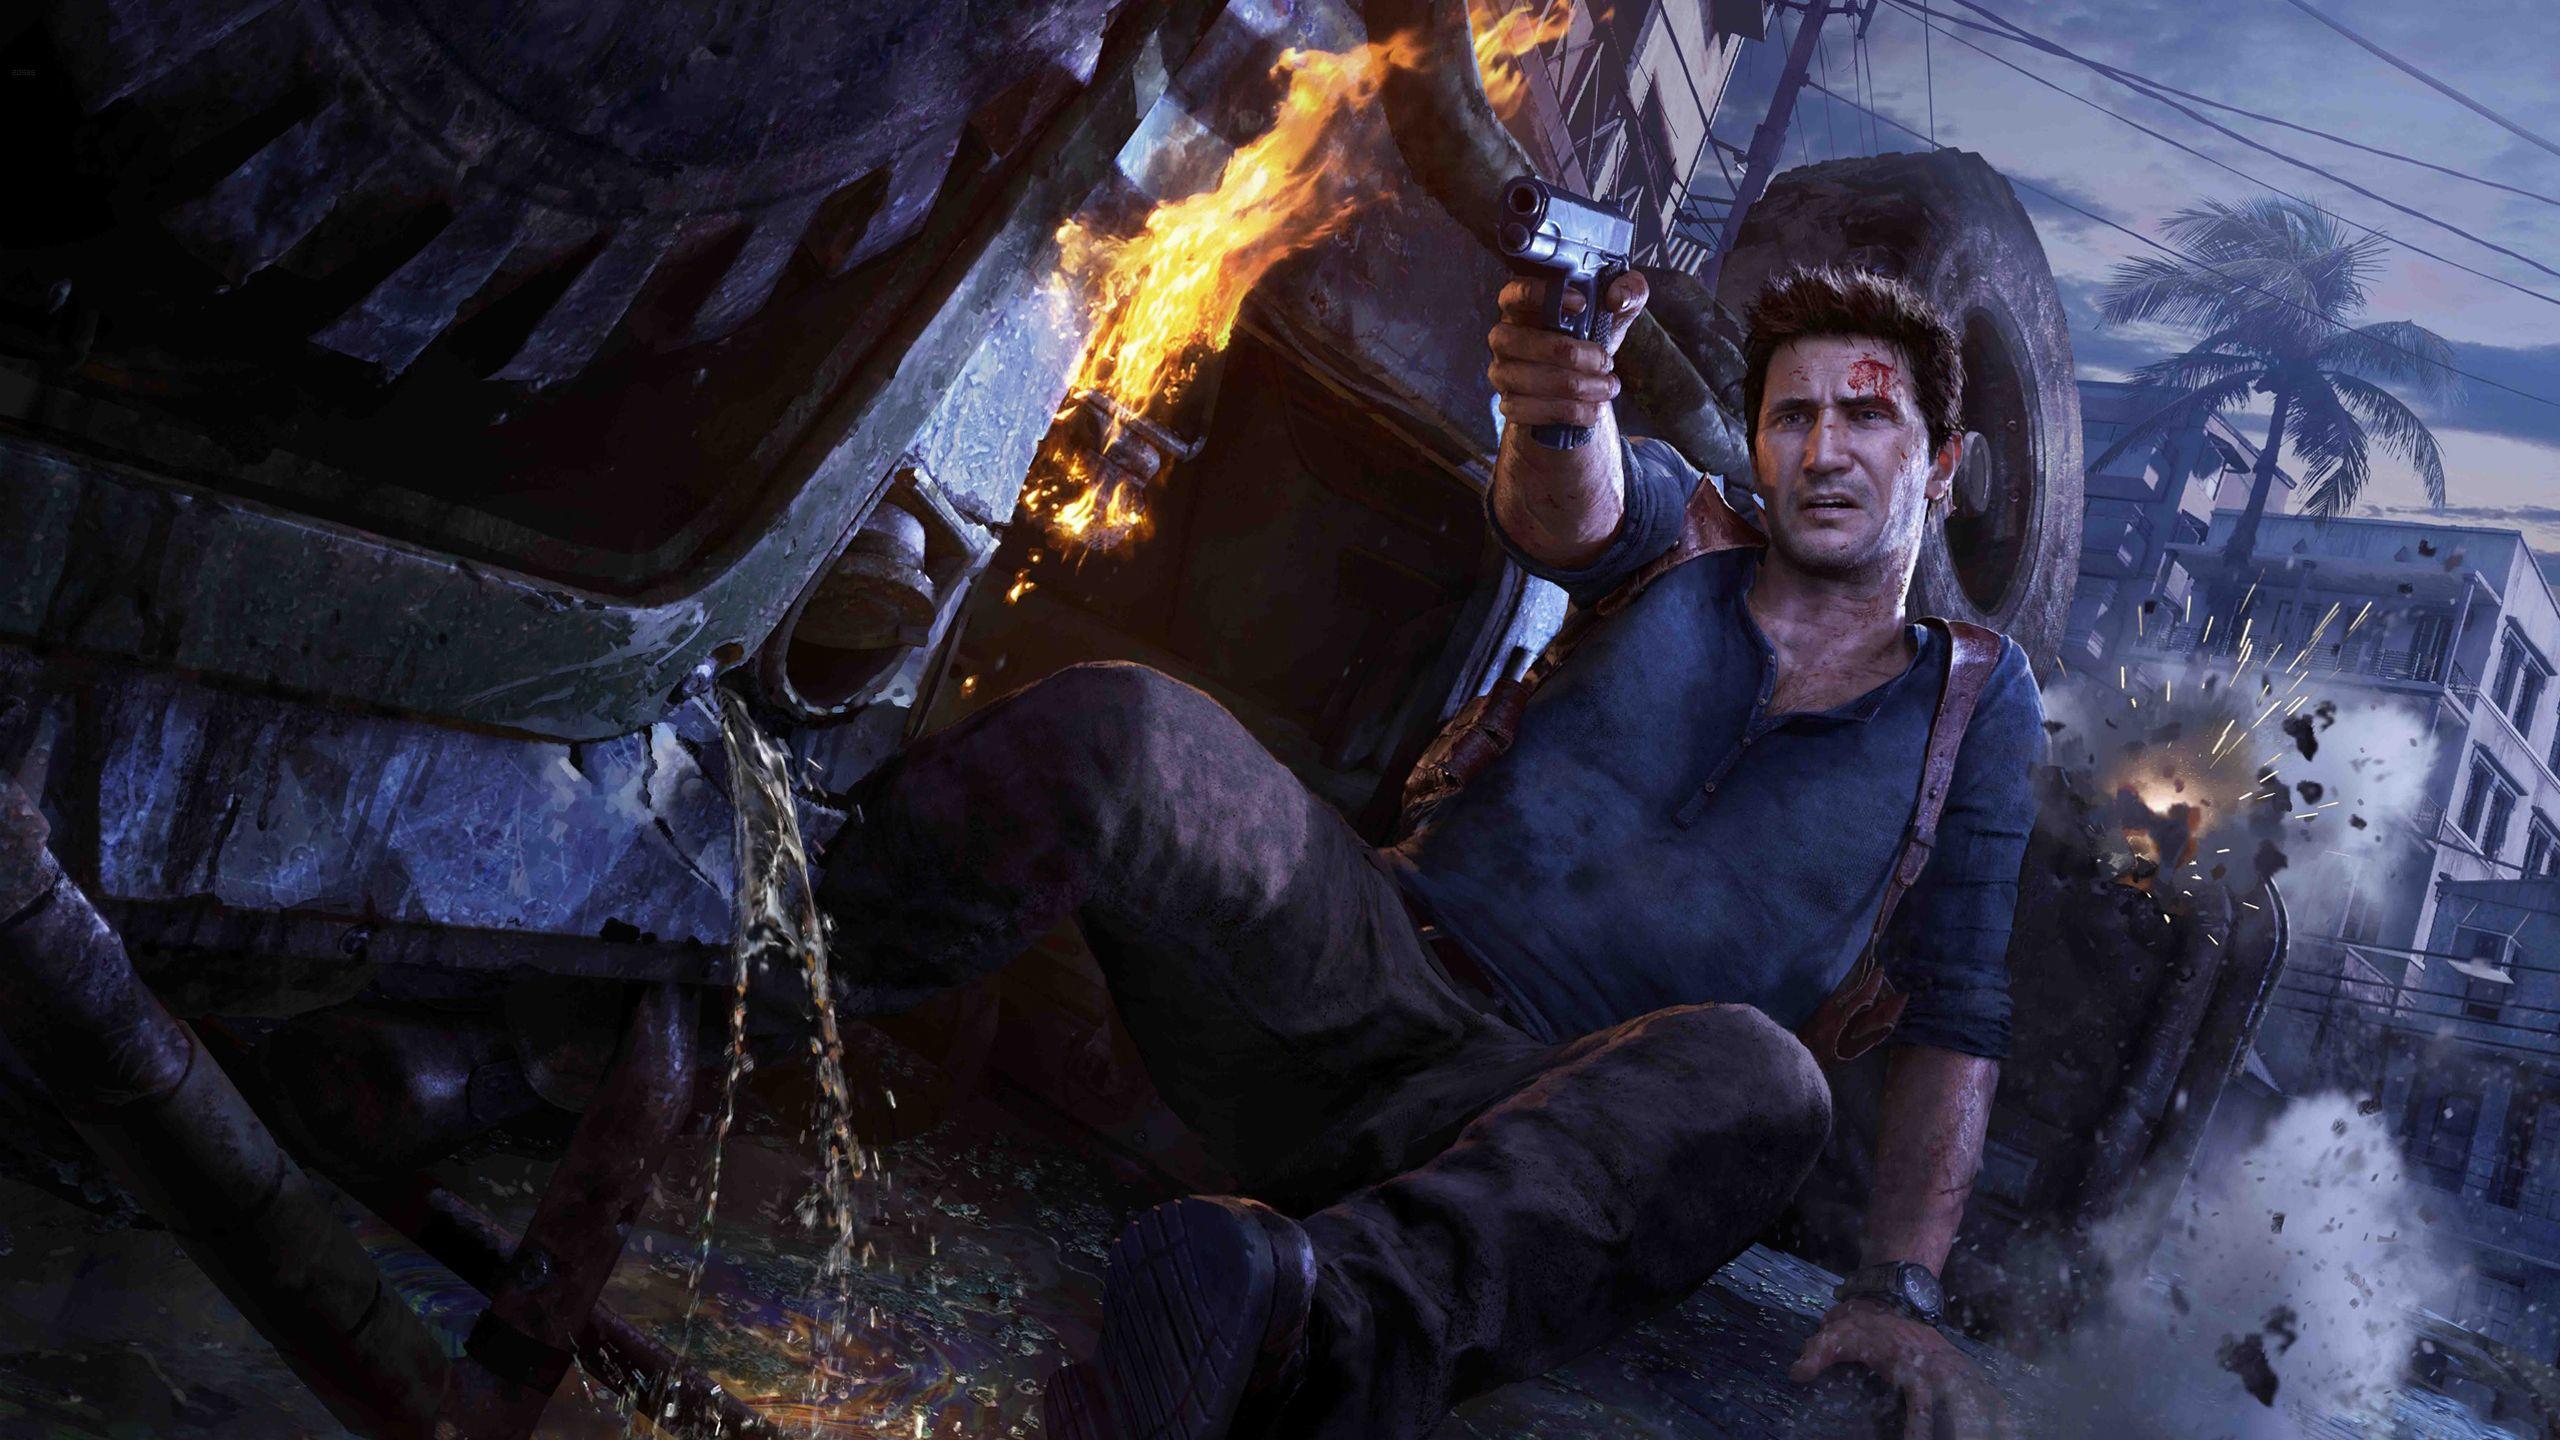 Uncharted Trilogy Wallpaper